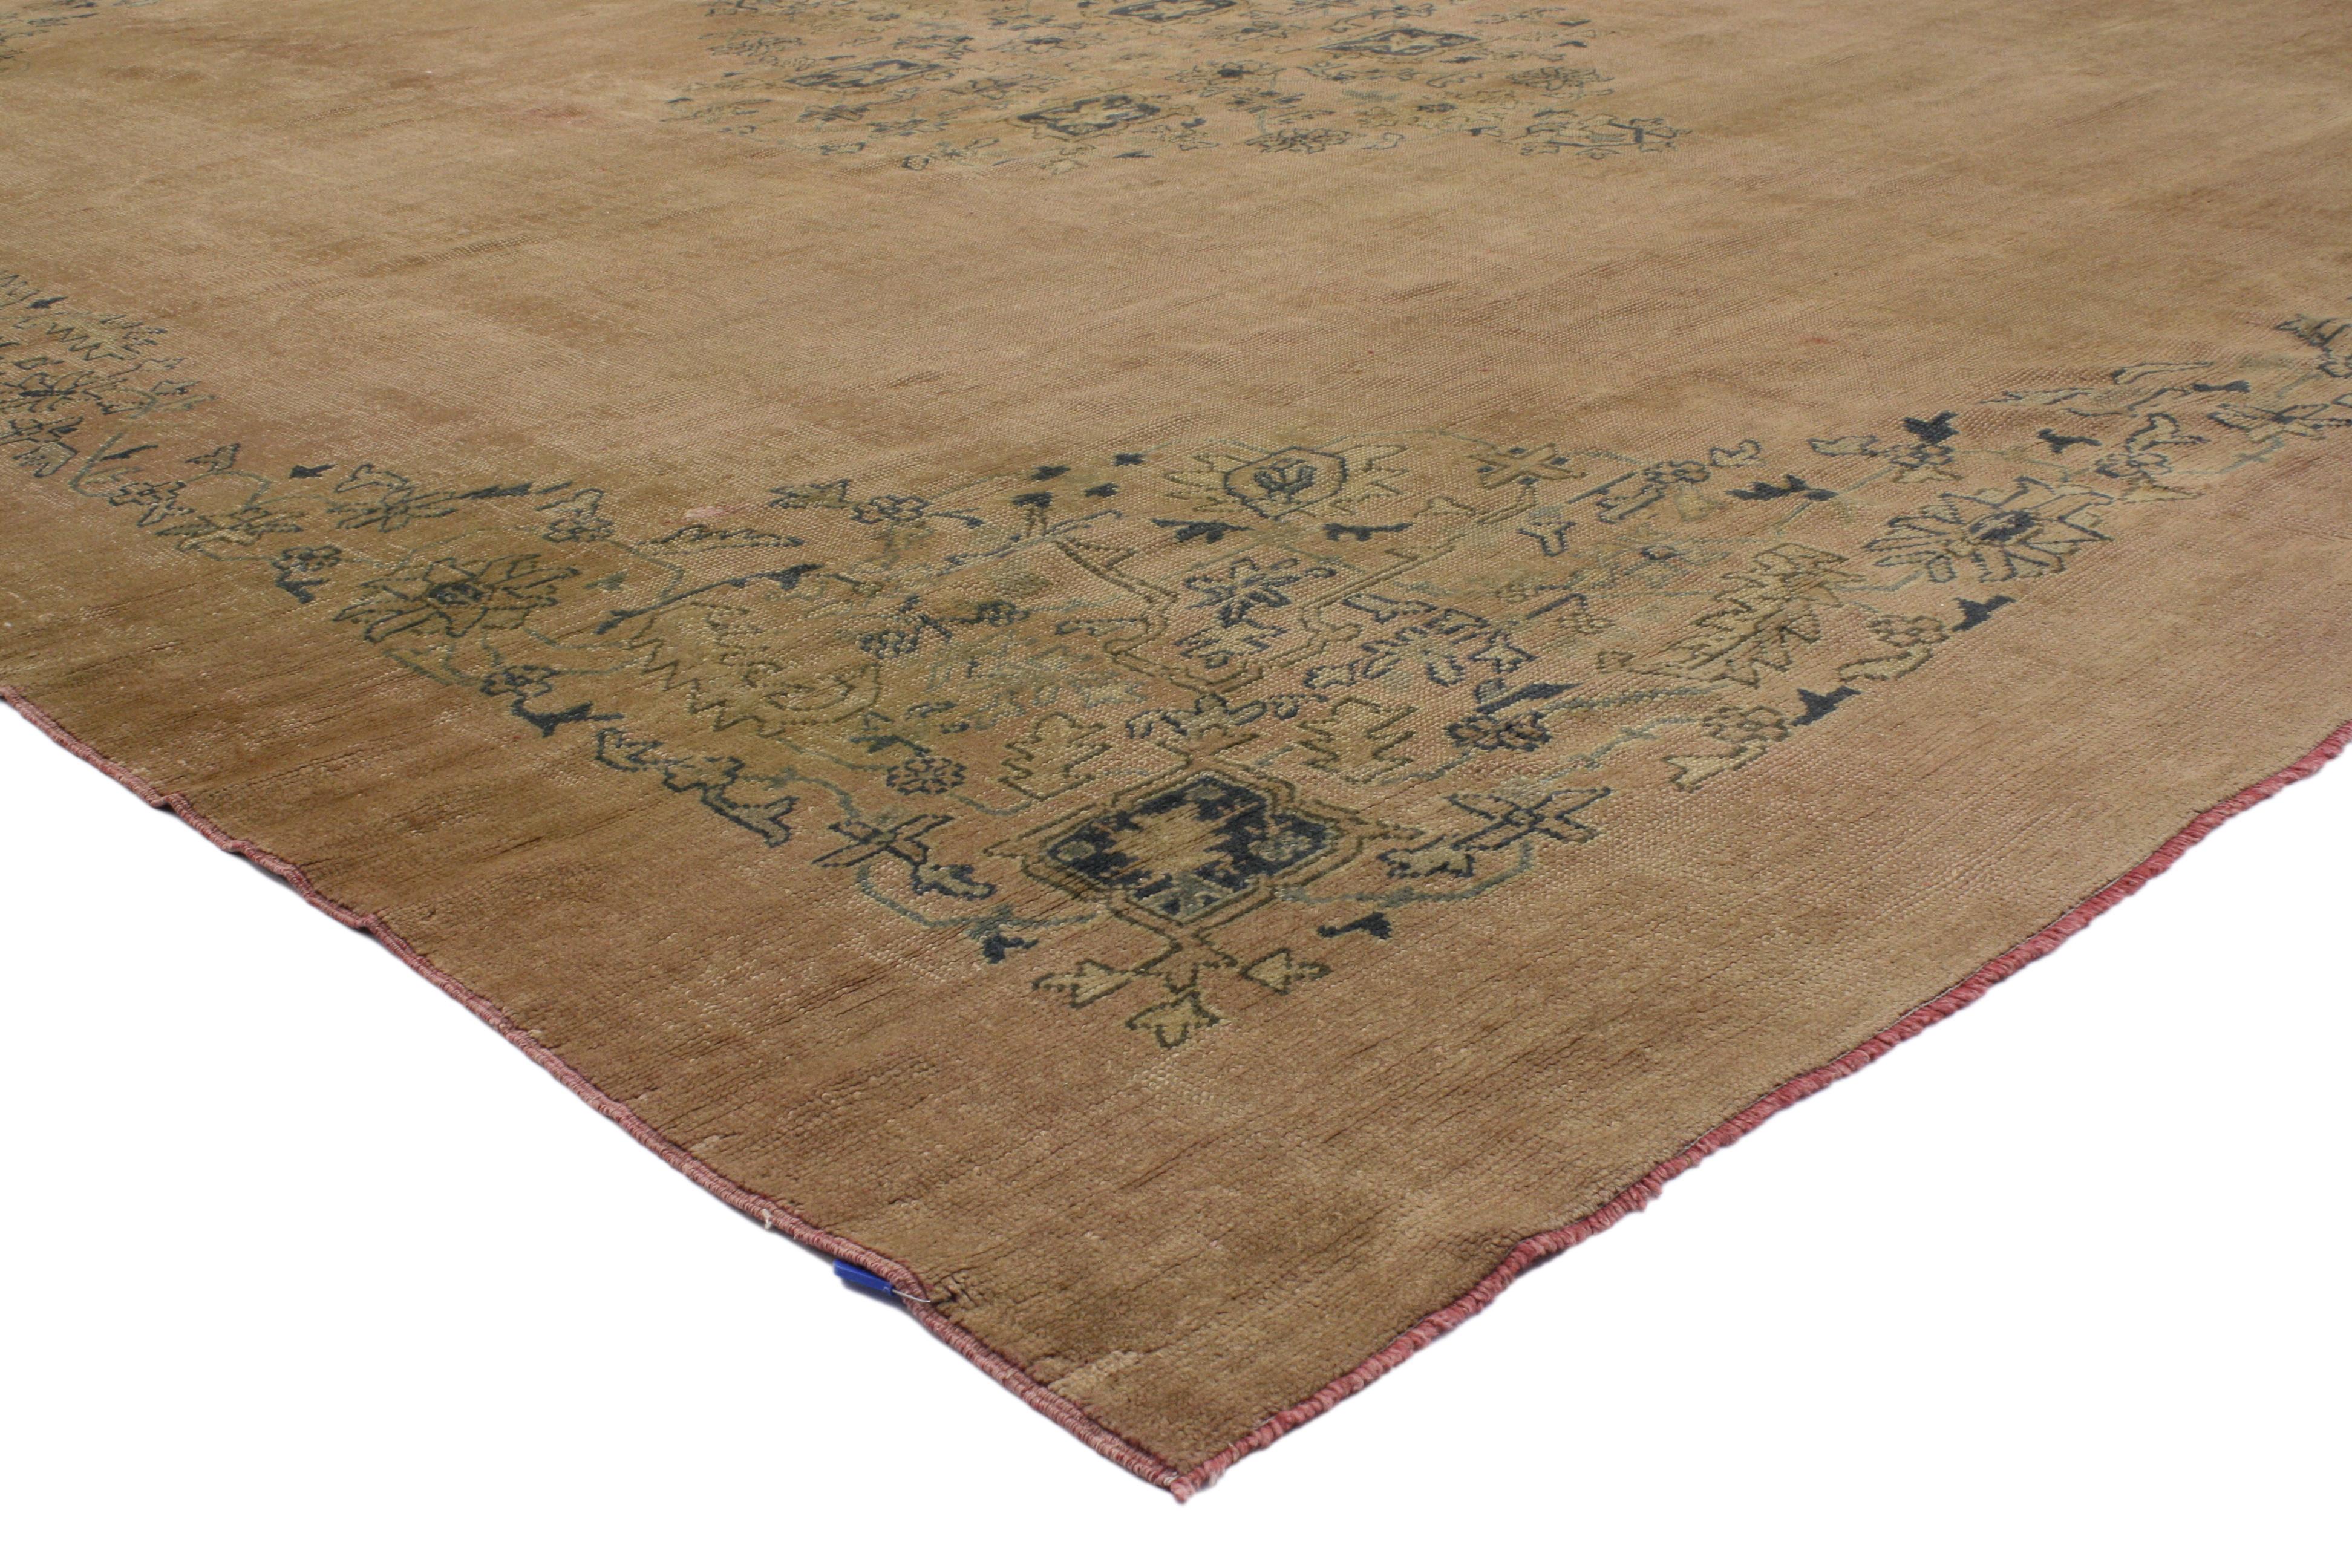 50214 Antique Turkish Oushak Area rug with Rustic Romantic Georgian style. A beautiful combination of rustic pink hues and soft blues in this hand-knotted wool antique Turkish Oushak rug create a delicate and effortlessly romantic ambiance. It